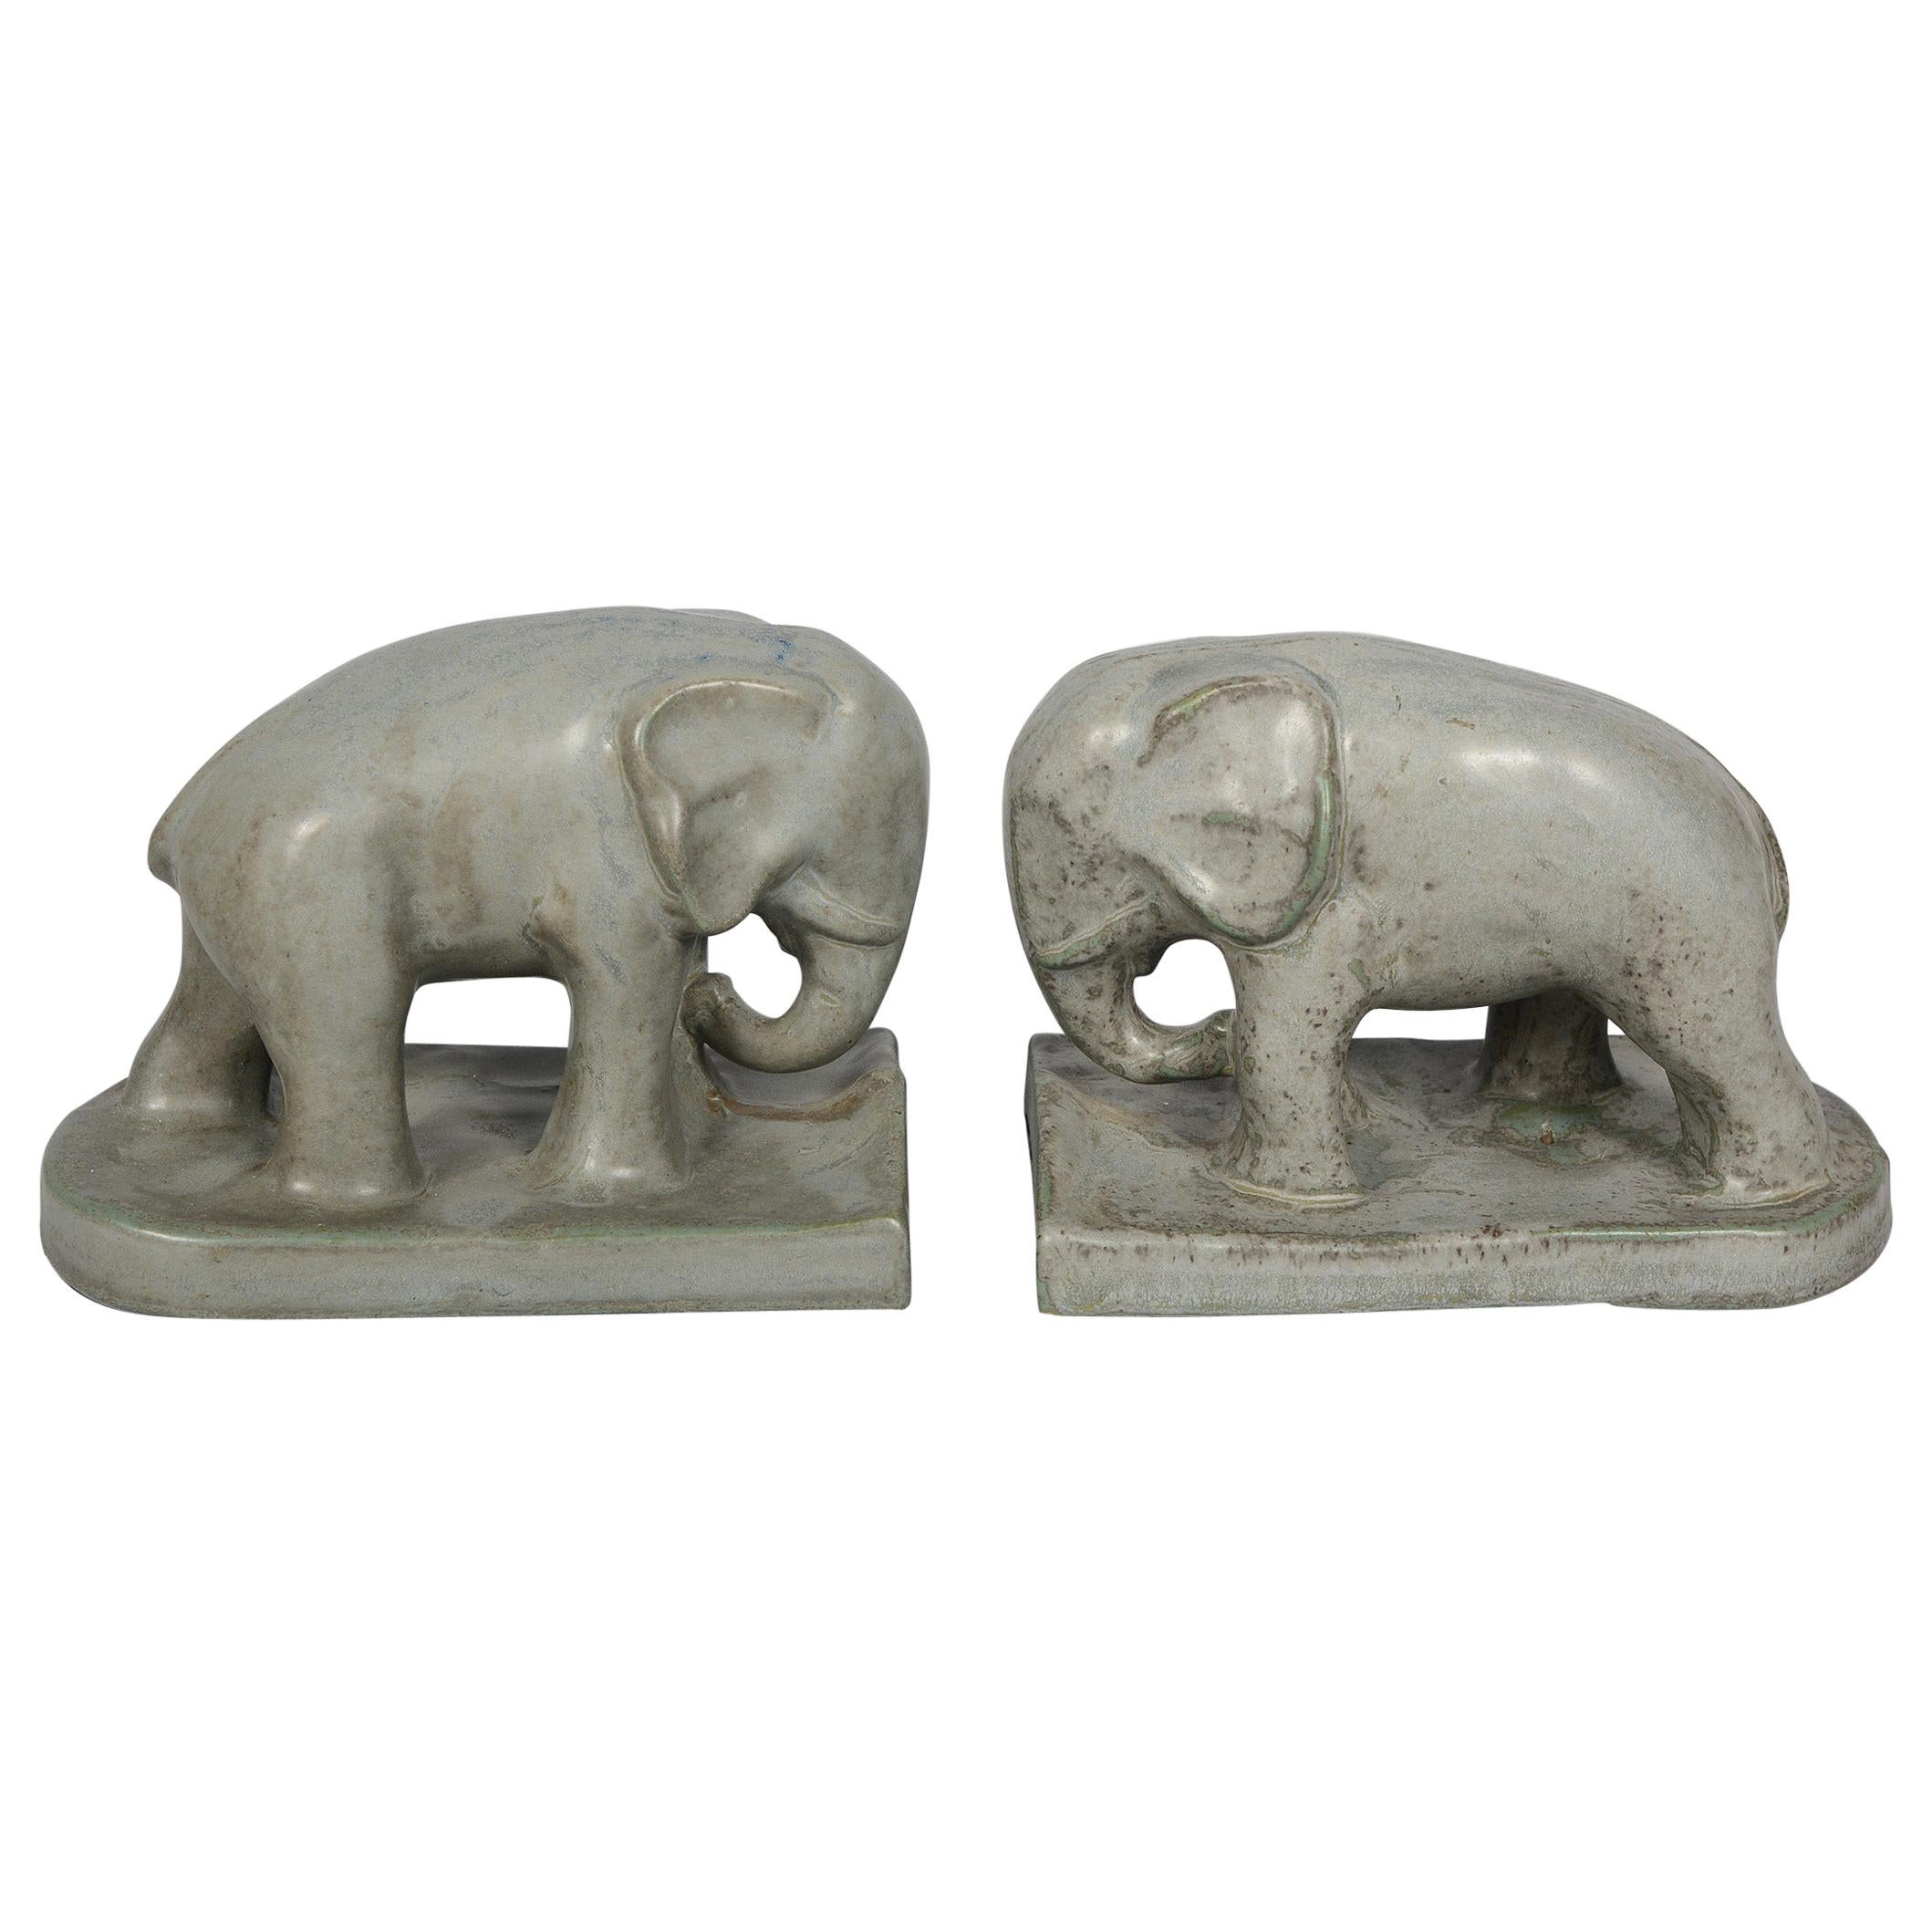 Pair of Arts and Crafts Pottery Elephant Bookends